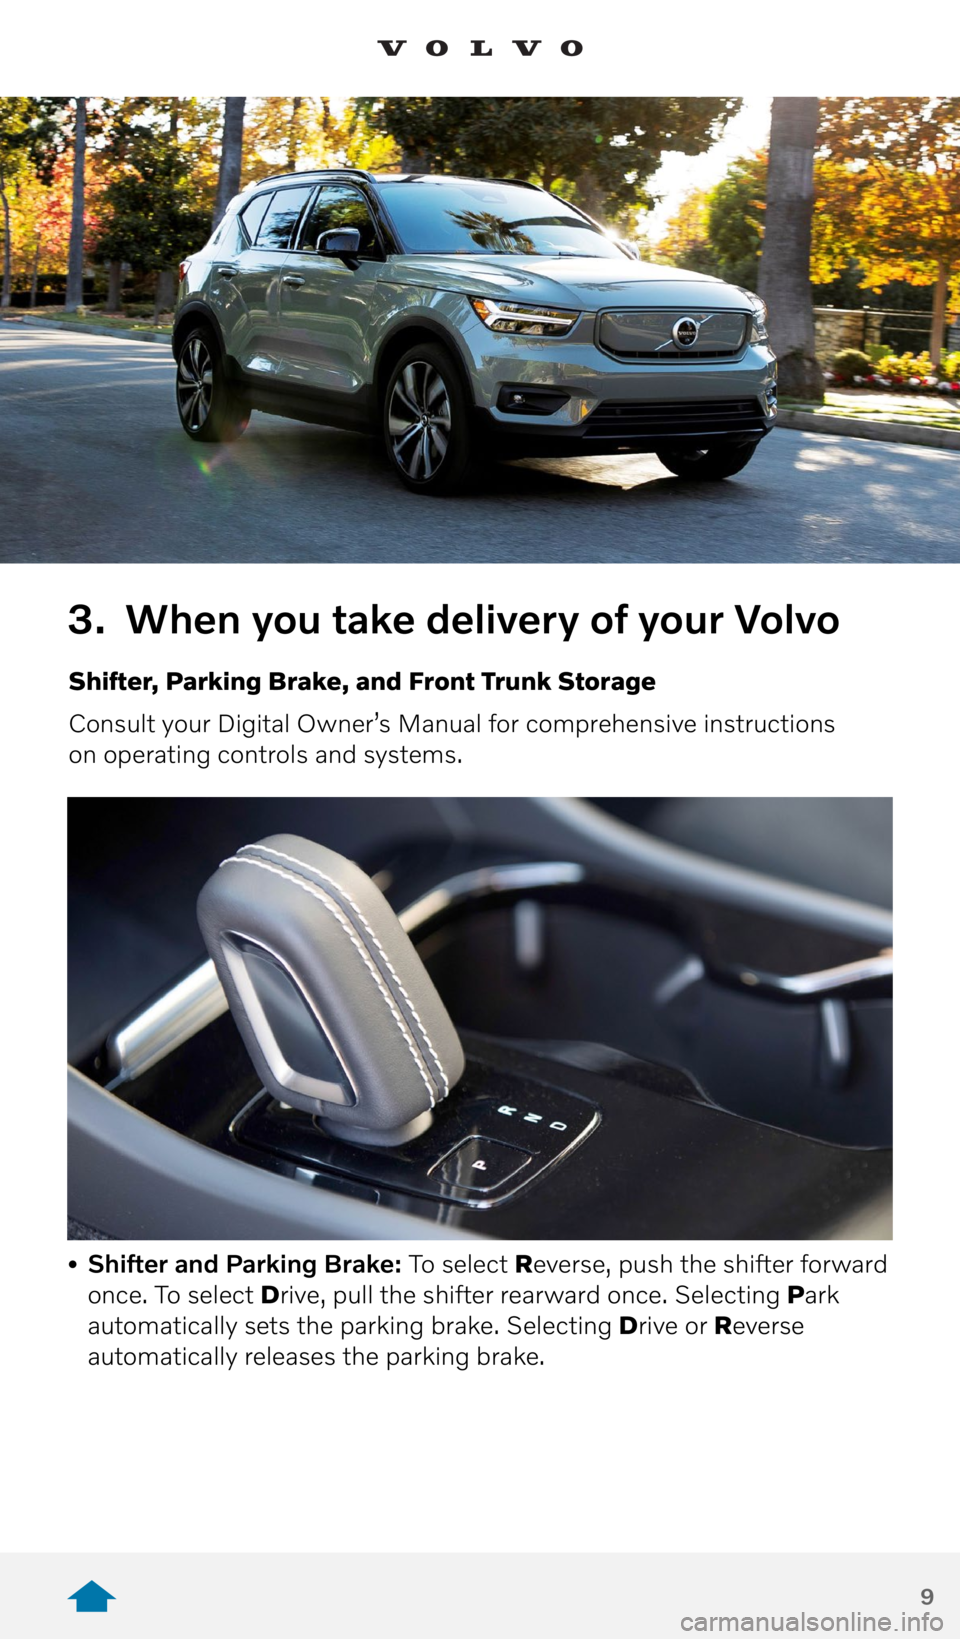 VOLVO XC40 RECHARGE PURE ELECTRIC 2021  Quick Guide 9
3. When you take delivery of your Volvo
Shifter, Parking Brake, and Front Trunk Storage
Consult your Digital Owner’s Manual for comprehensive instructions  
on operating controls and systems.
• 